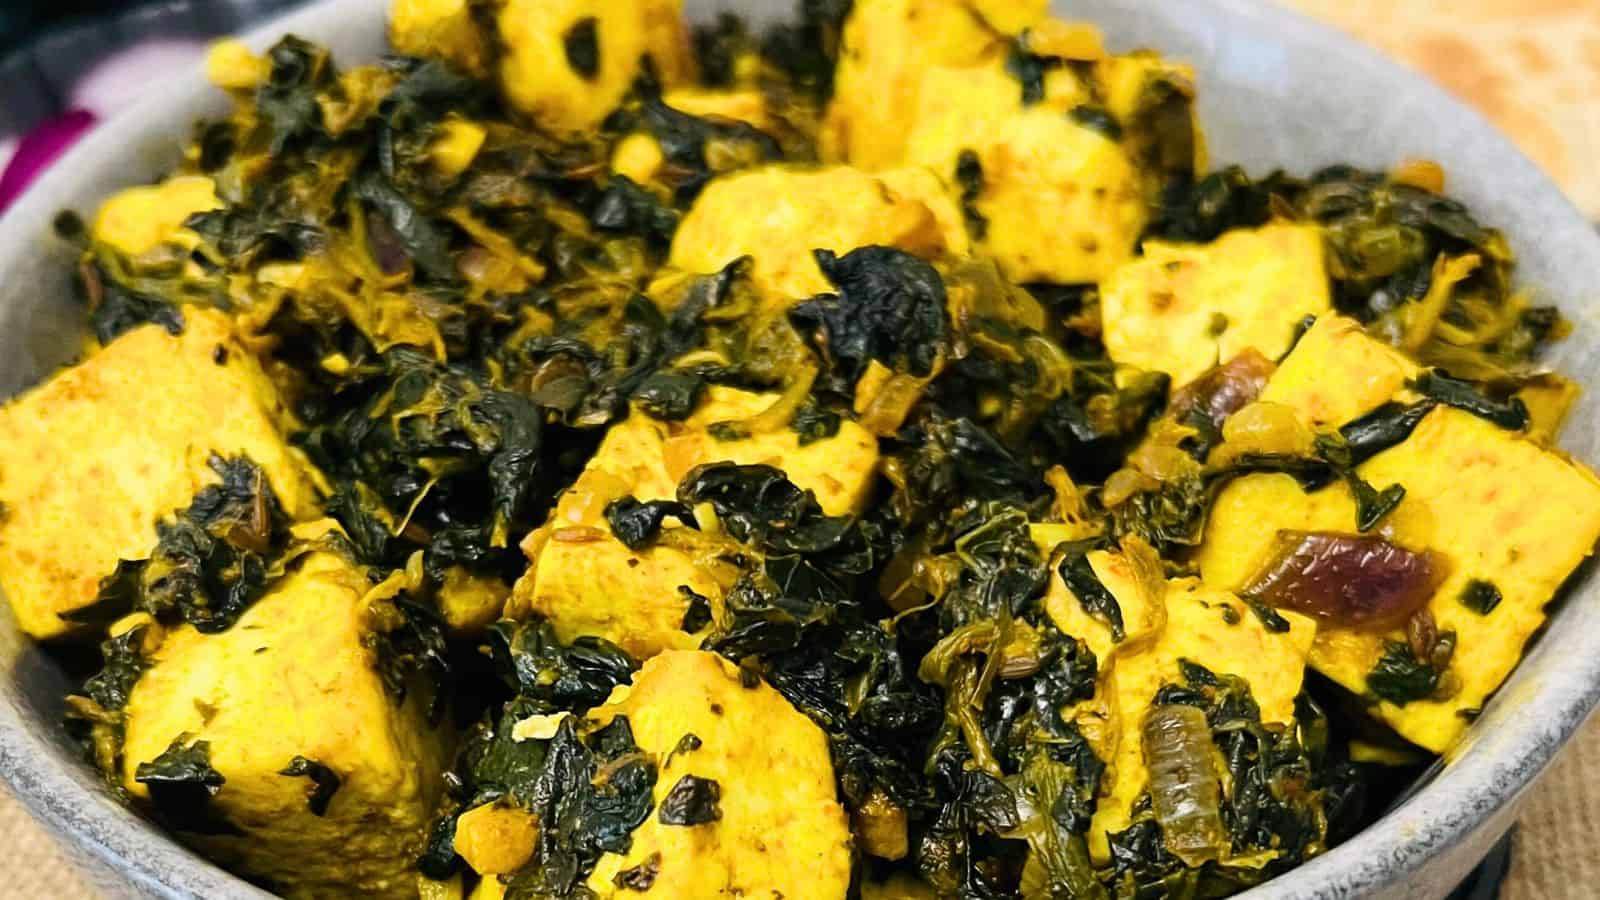 A bowl of indian Palak Paneer Stir Fry, featuring cubes of paneer cheese mixed with spiced, cooked spinach and herbs.